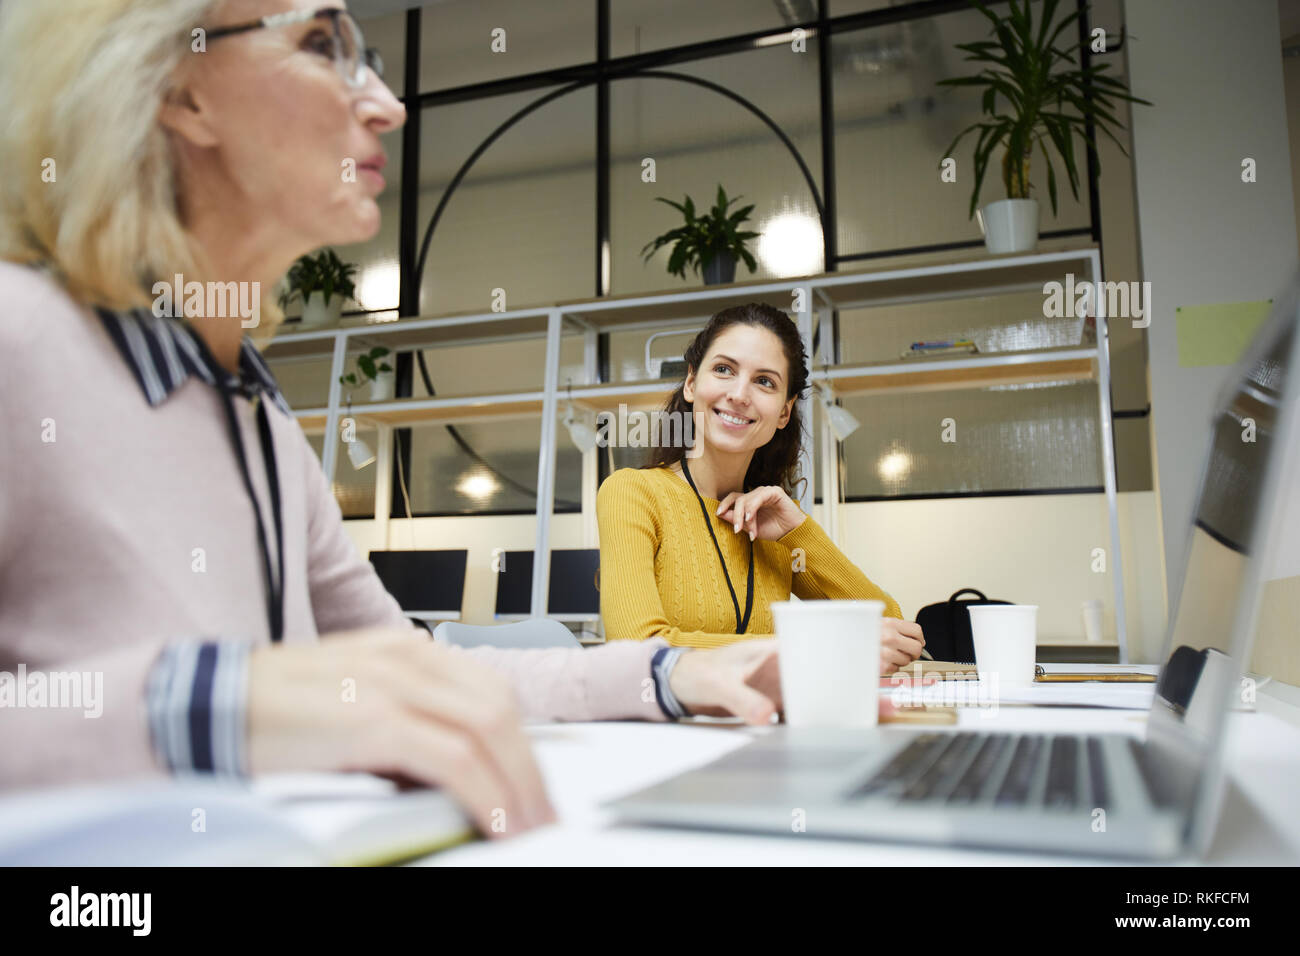 Smiling ladies chatting in office Stock Photo